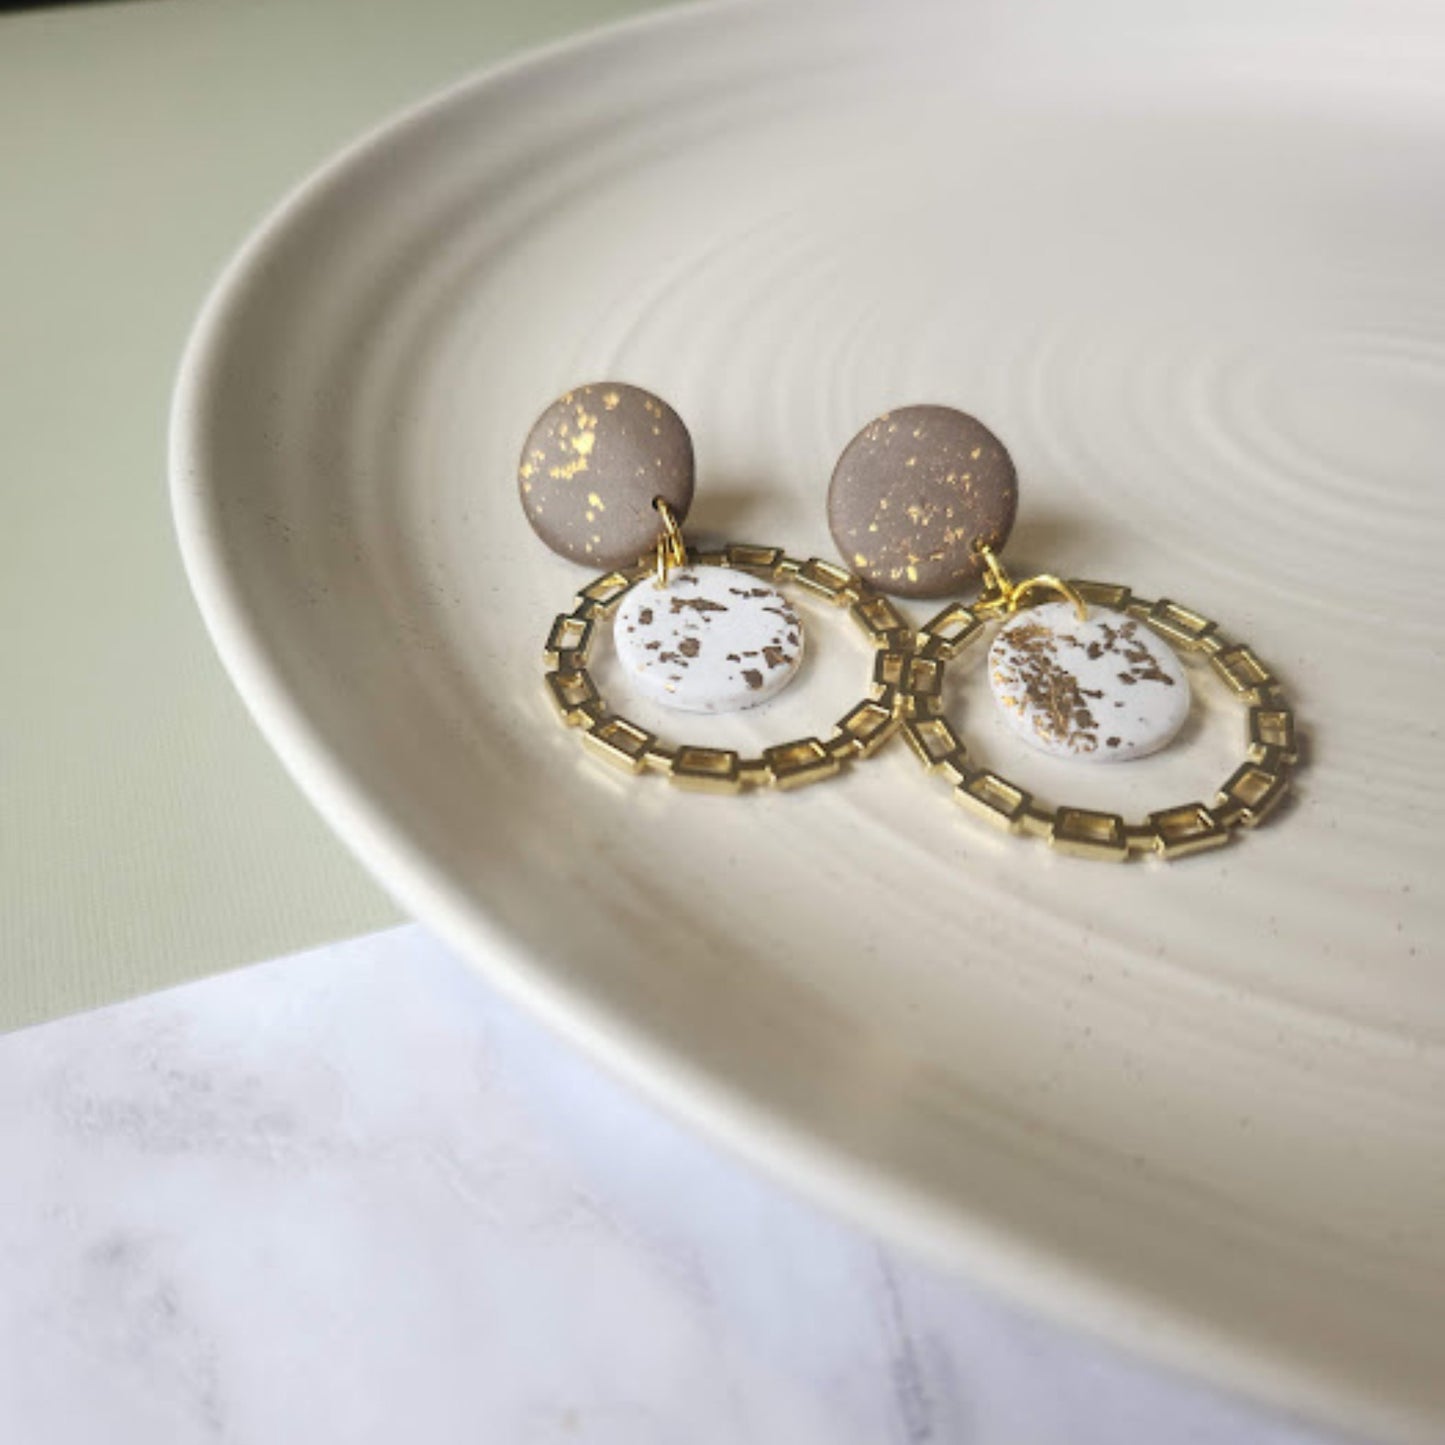 The Luna Polymer Clay Dangle Earrings in Brown and White